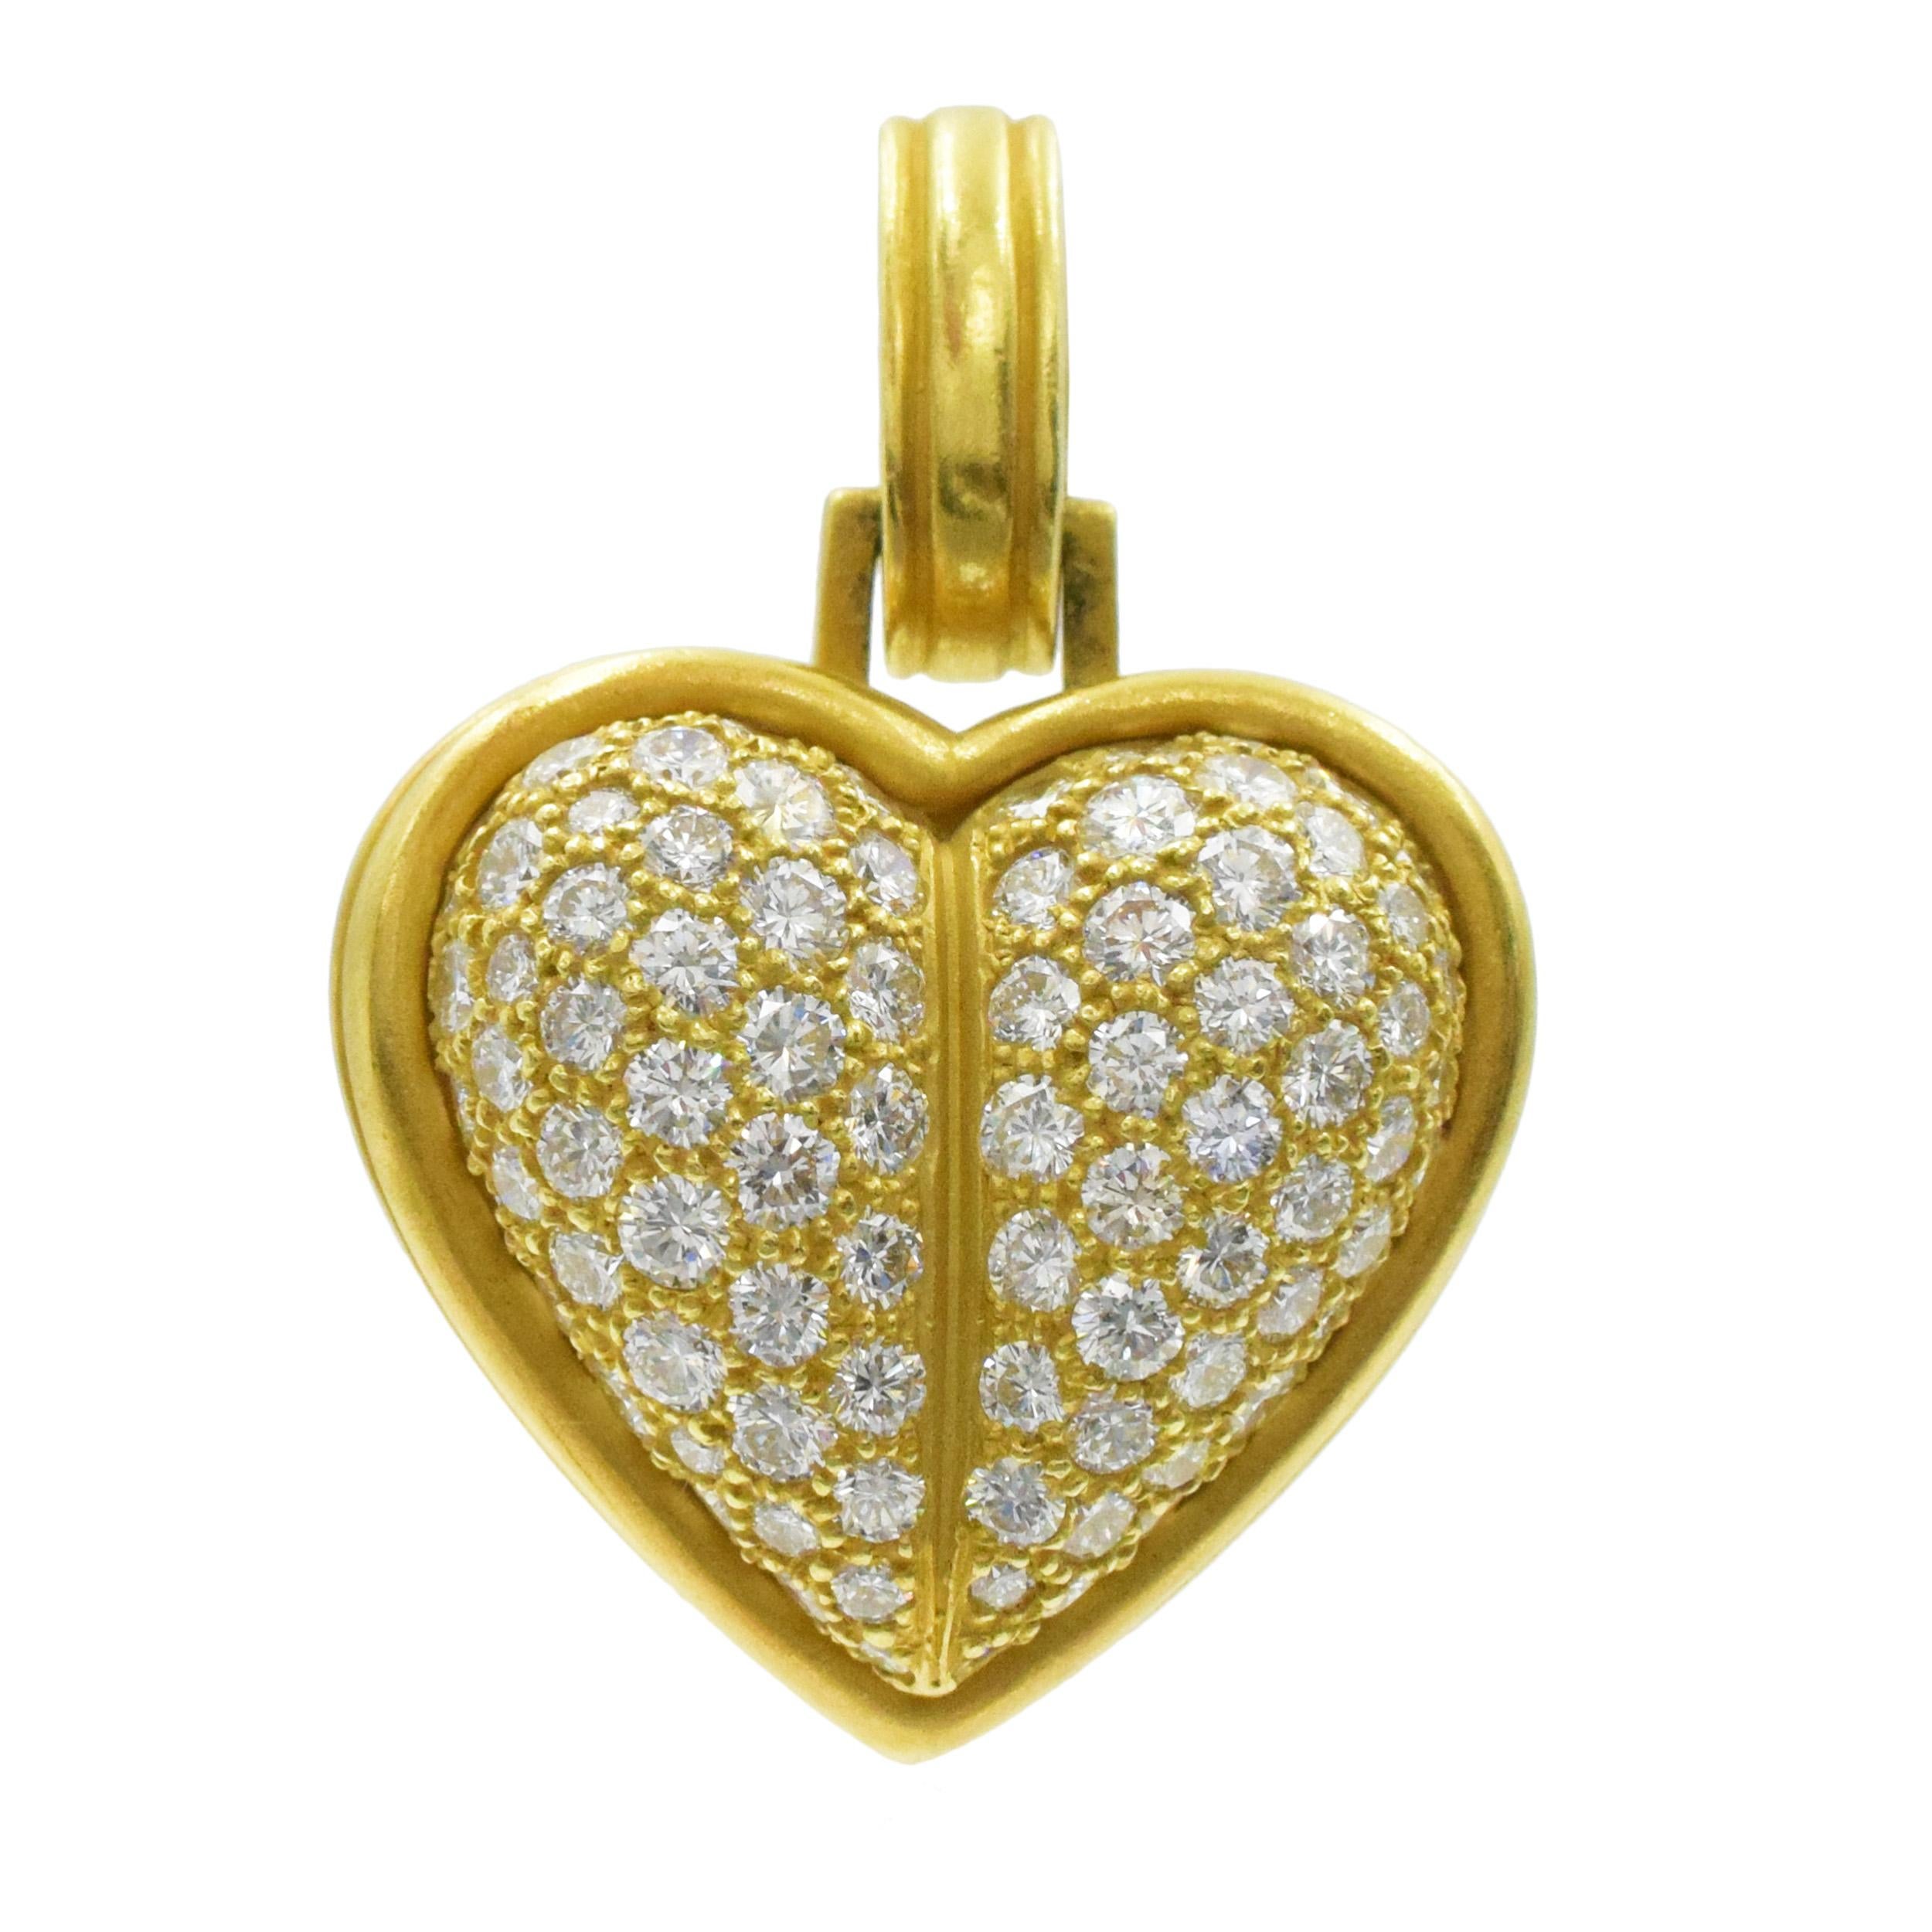 Kieselstein Cord 18k yellow gold and diamond detachable heart pendant. This large pendant is designed as a dome shaped heart encrusted with round brilliant cut diamonds, framed in matte finish
18k yellow gold, suspended from detachable 18k yellow